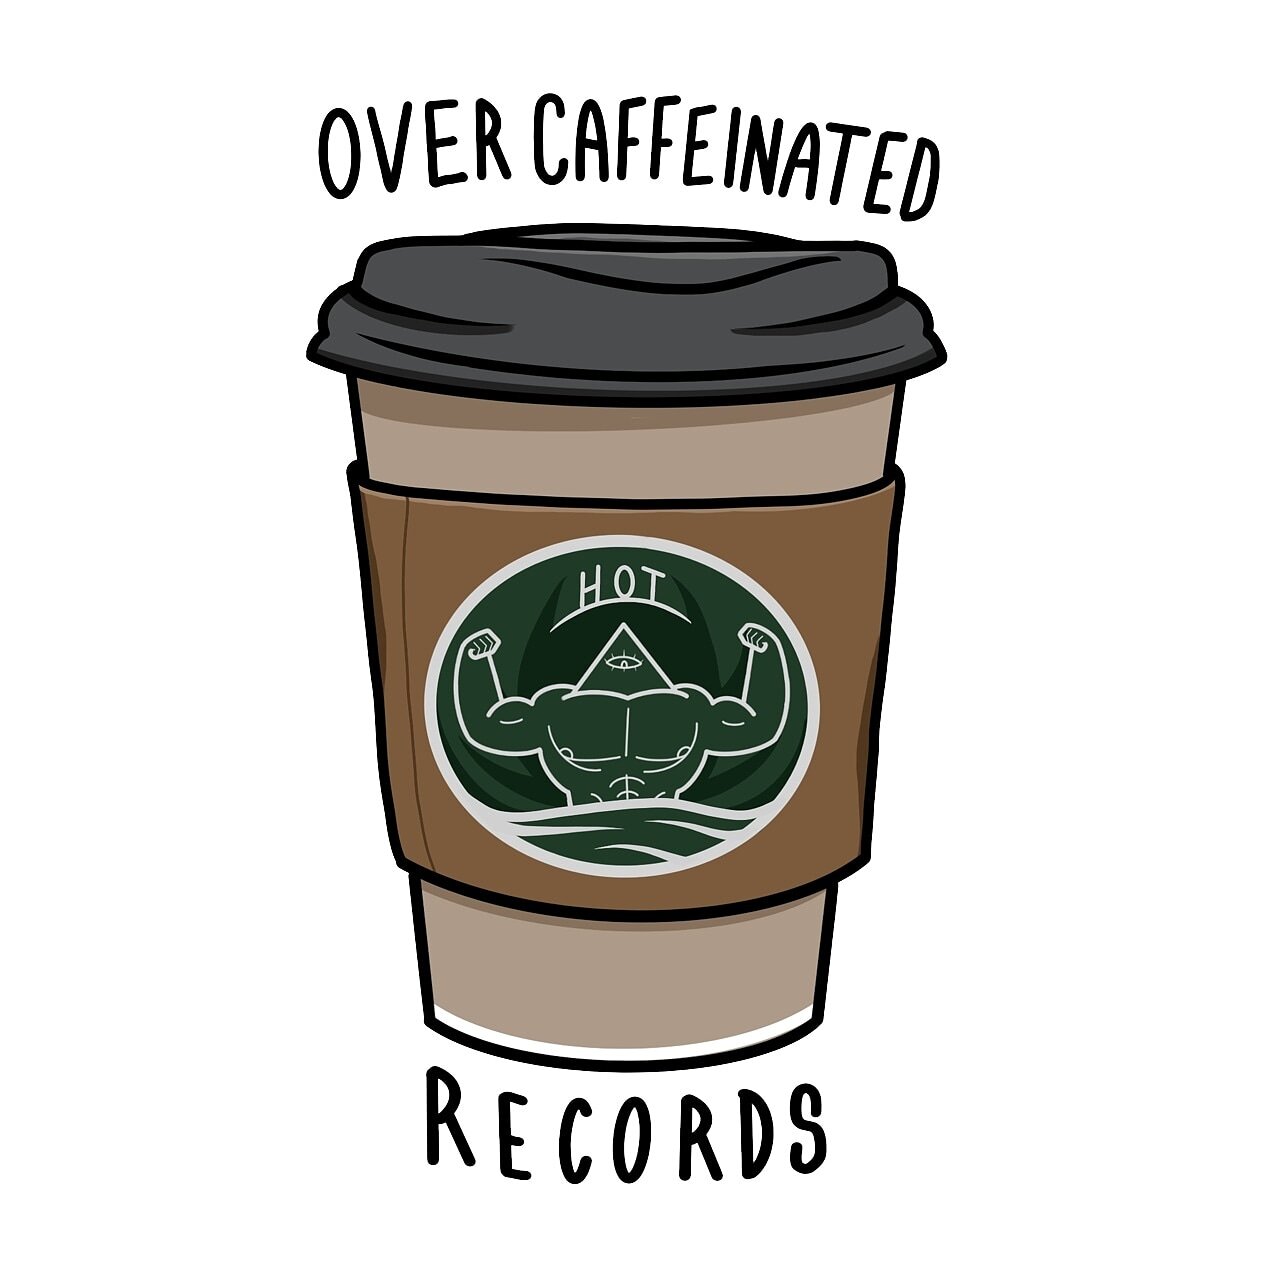 Over Caffeinated Records